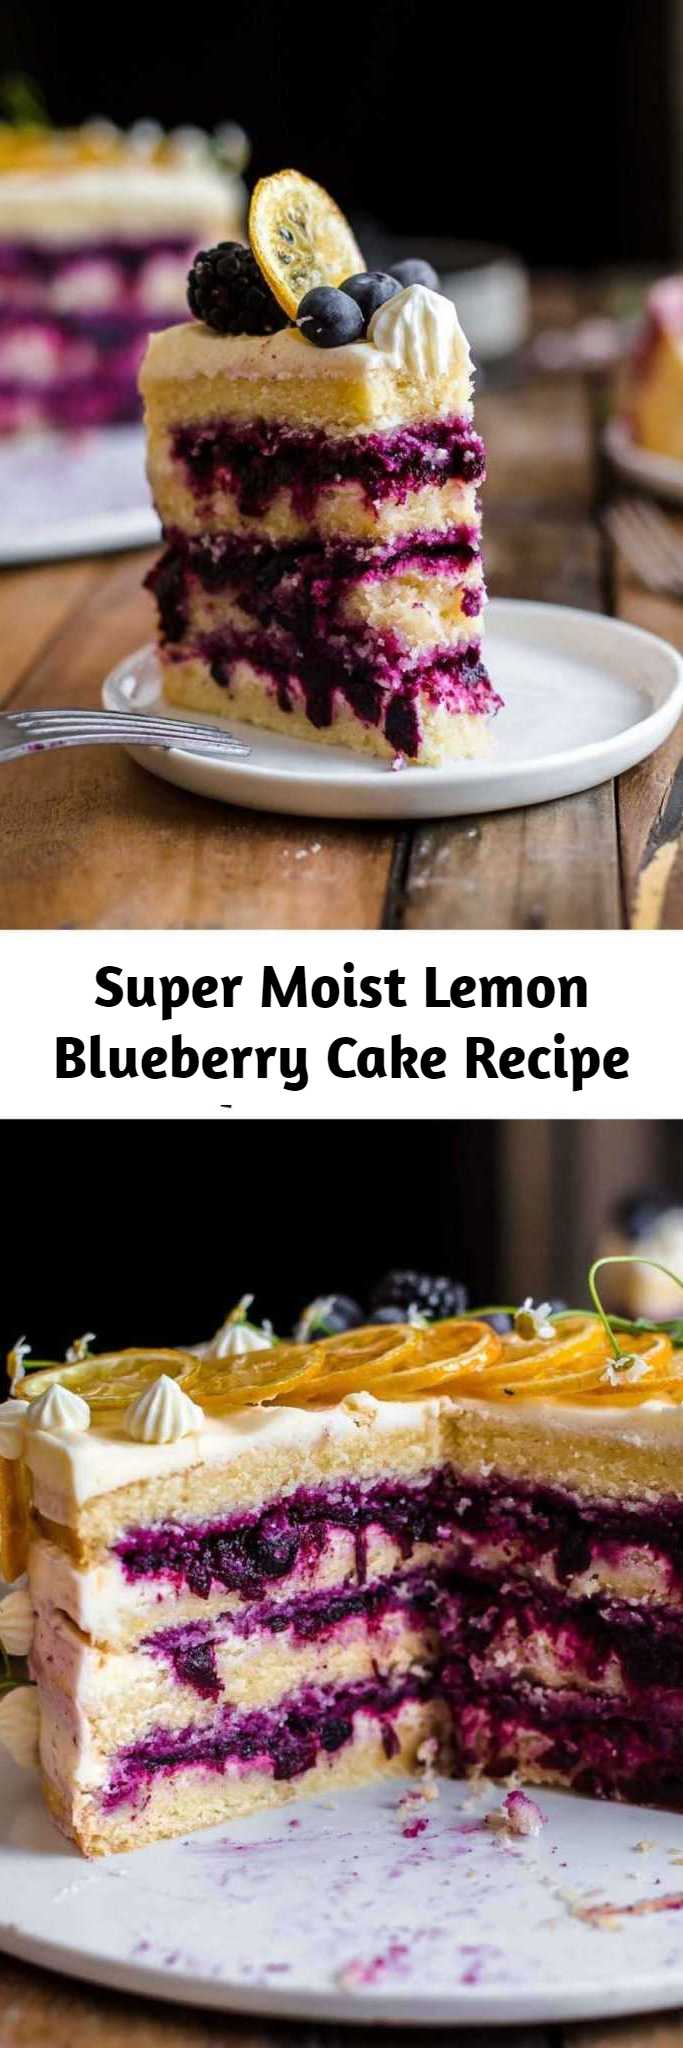 Super Moist Lemon Blueberry Cake Recipe - This Lemon Blueberry Cake is tangy, sweet, super moist, and creamy. It's a delicious and beautiful cake. It comes with soft lemon cake layers, a sweet blueberry filling, and an ultra creamy lemon cream cheese frosting. #lemon #blueberry #cake #creamcheesefrosting #baking #sweets #dessert